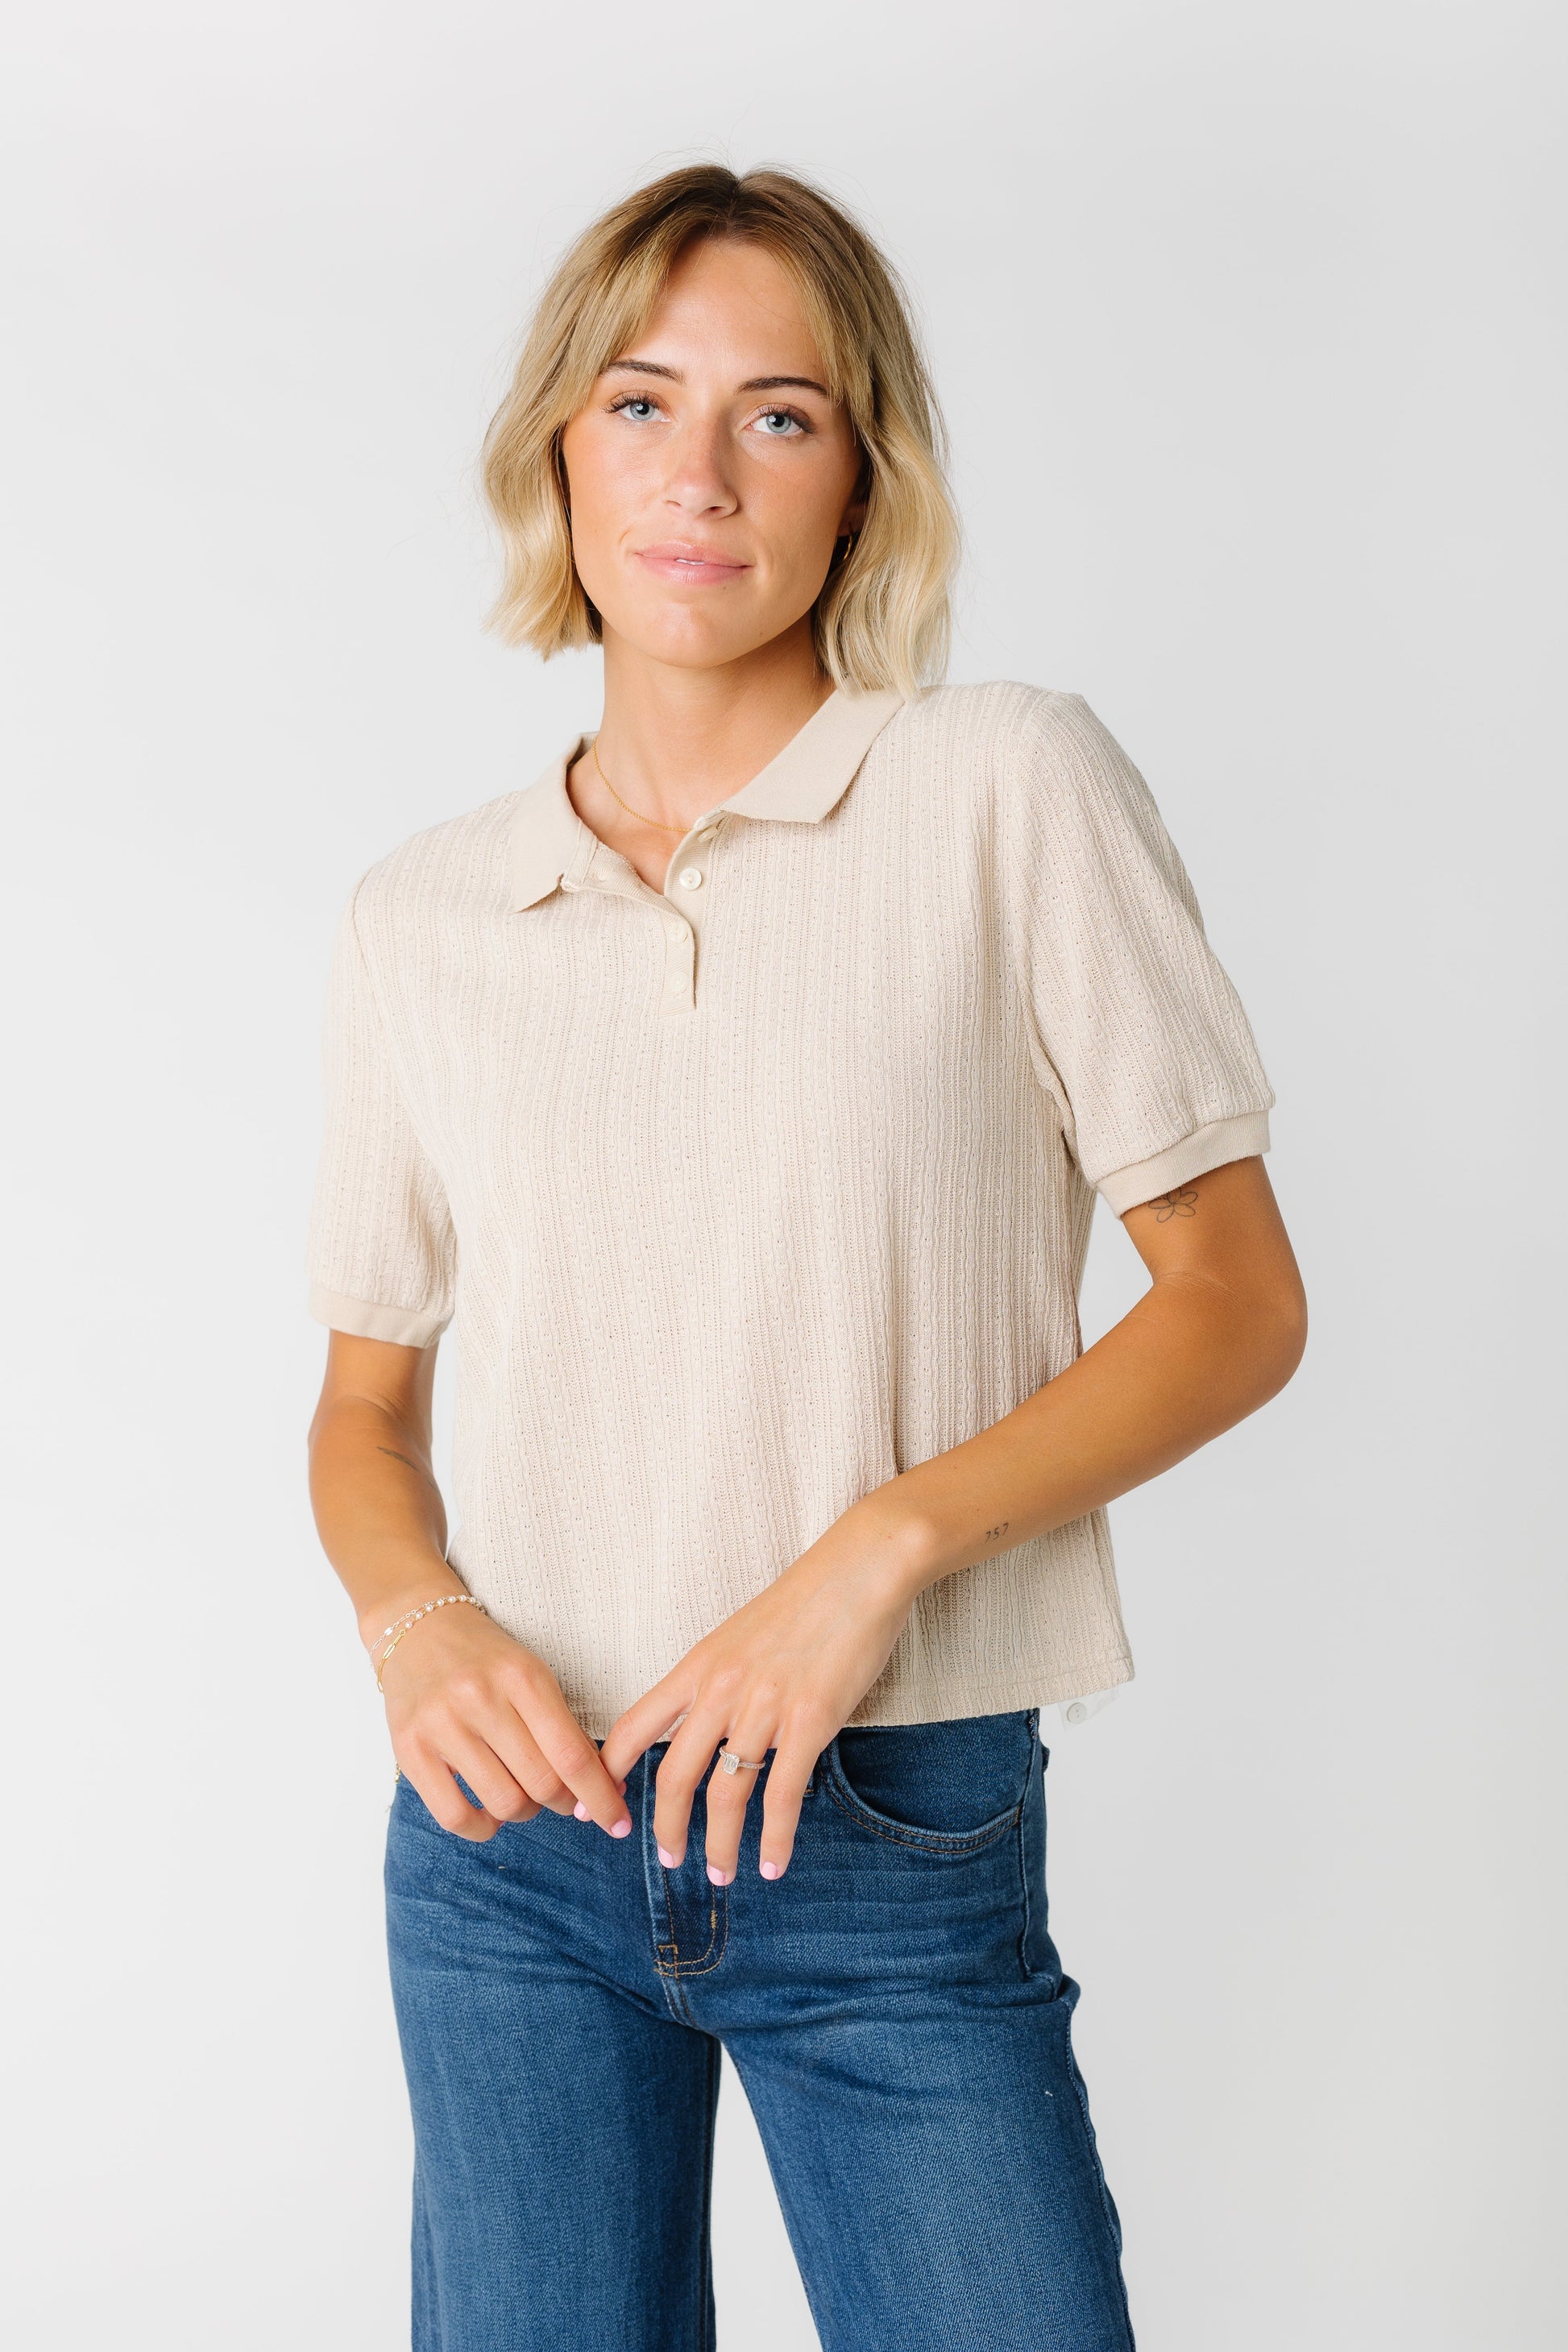 The Billie Top WOMEN'S TOP Mod Ref Taupe L 